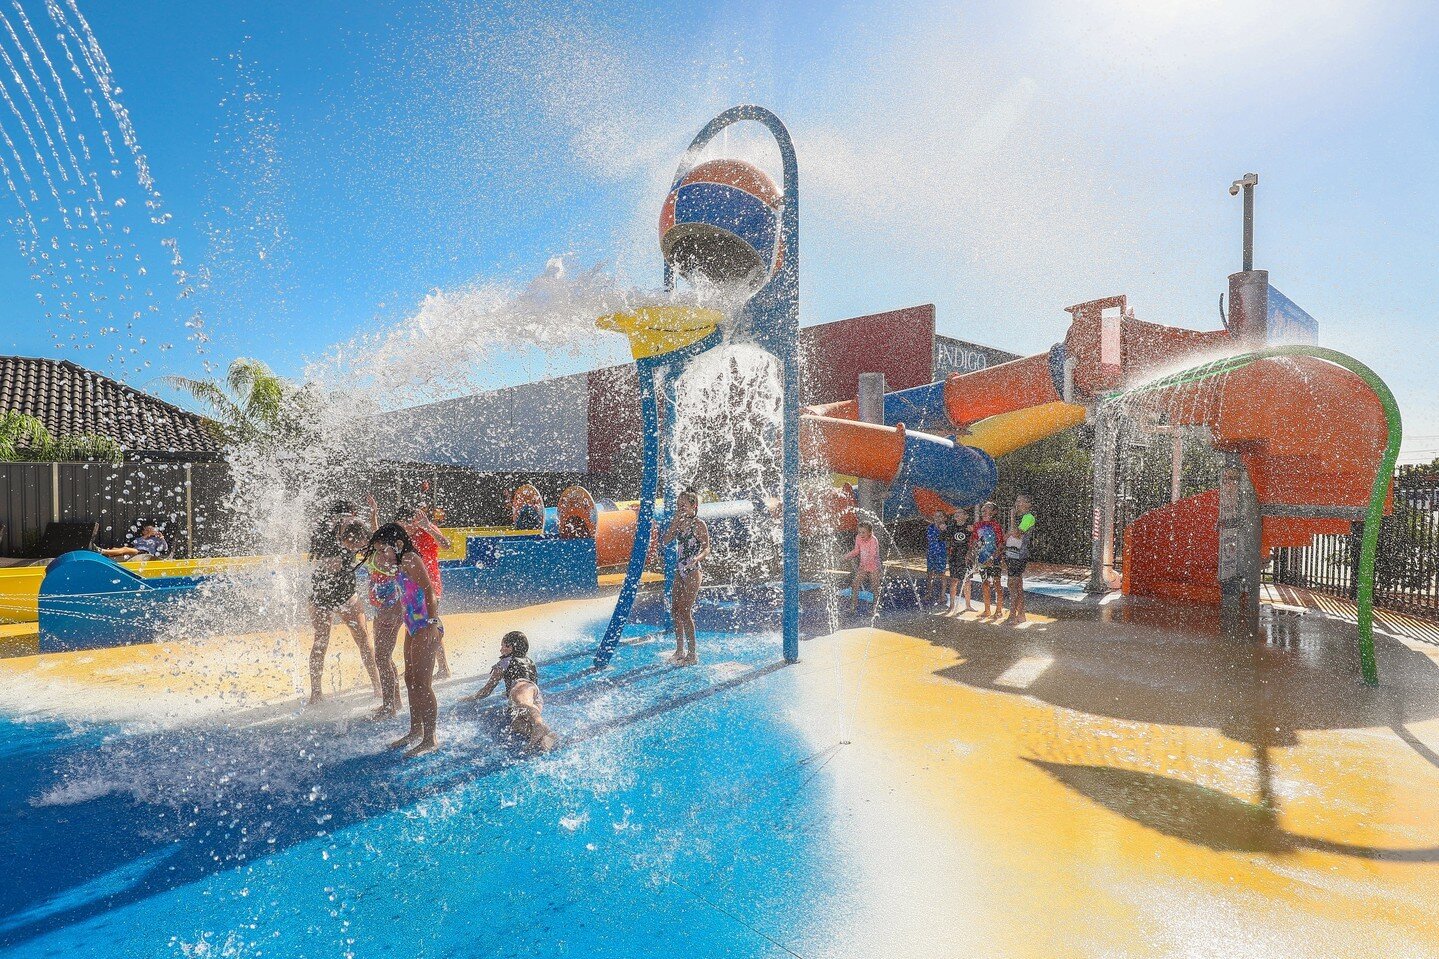 Project Highlight: All Seasons Mildura by @waterplayers
this action-packed splash pad has been an instant hit amongst holiday-goers of all ages, offering a one-of-kind guest experience. Crushing initial expectations from day one, bookings have sky-ro